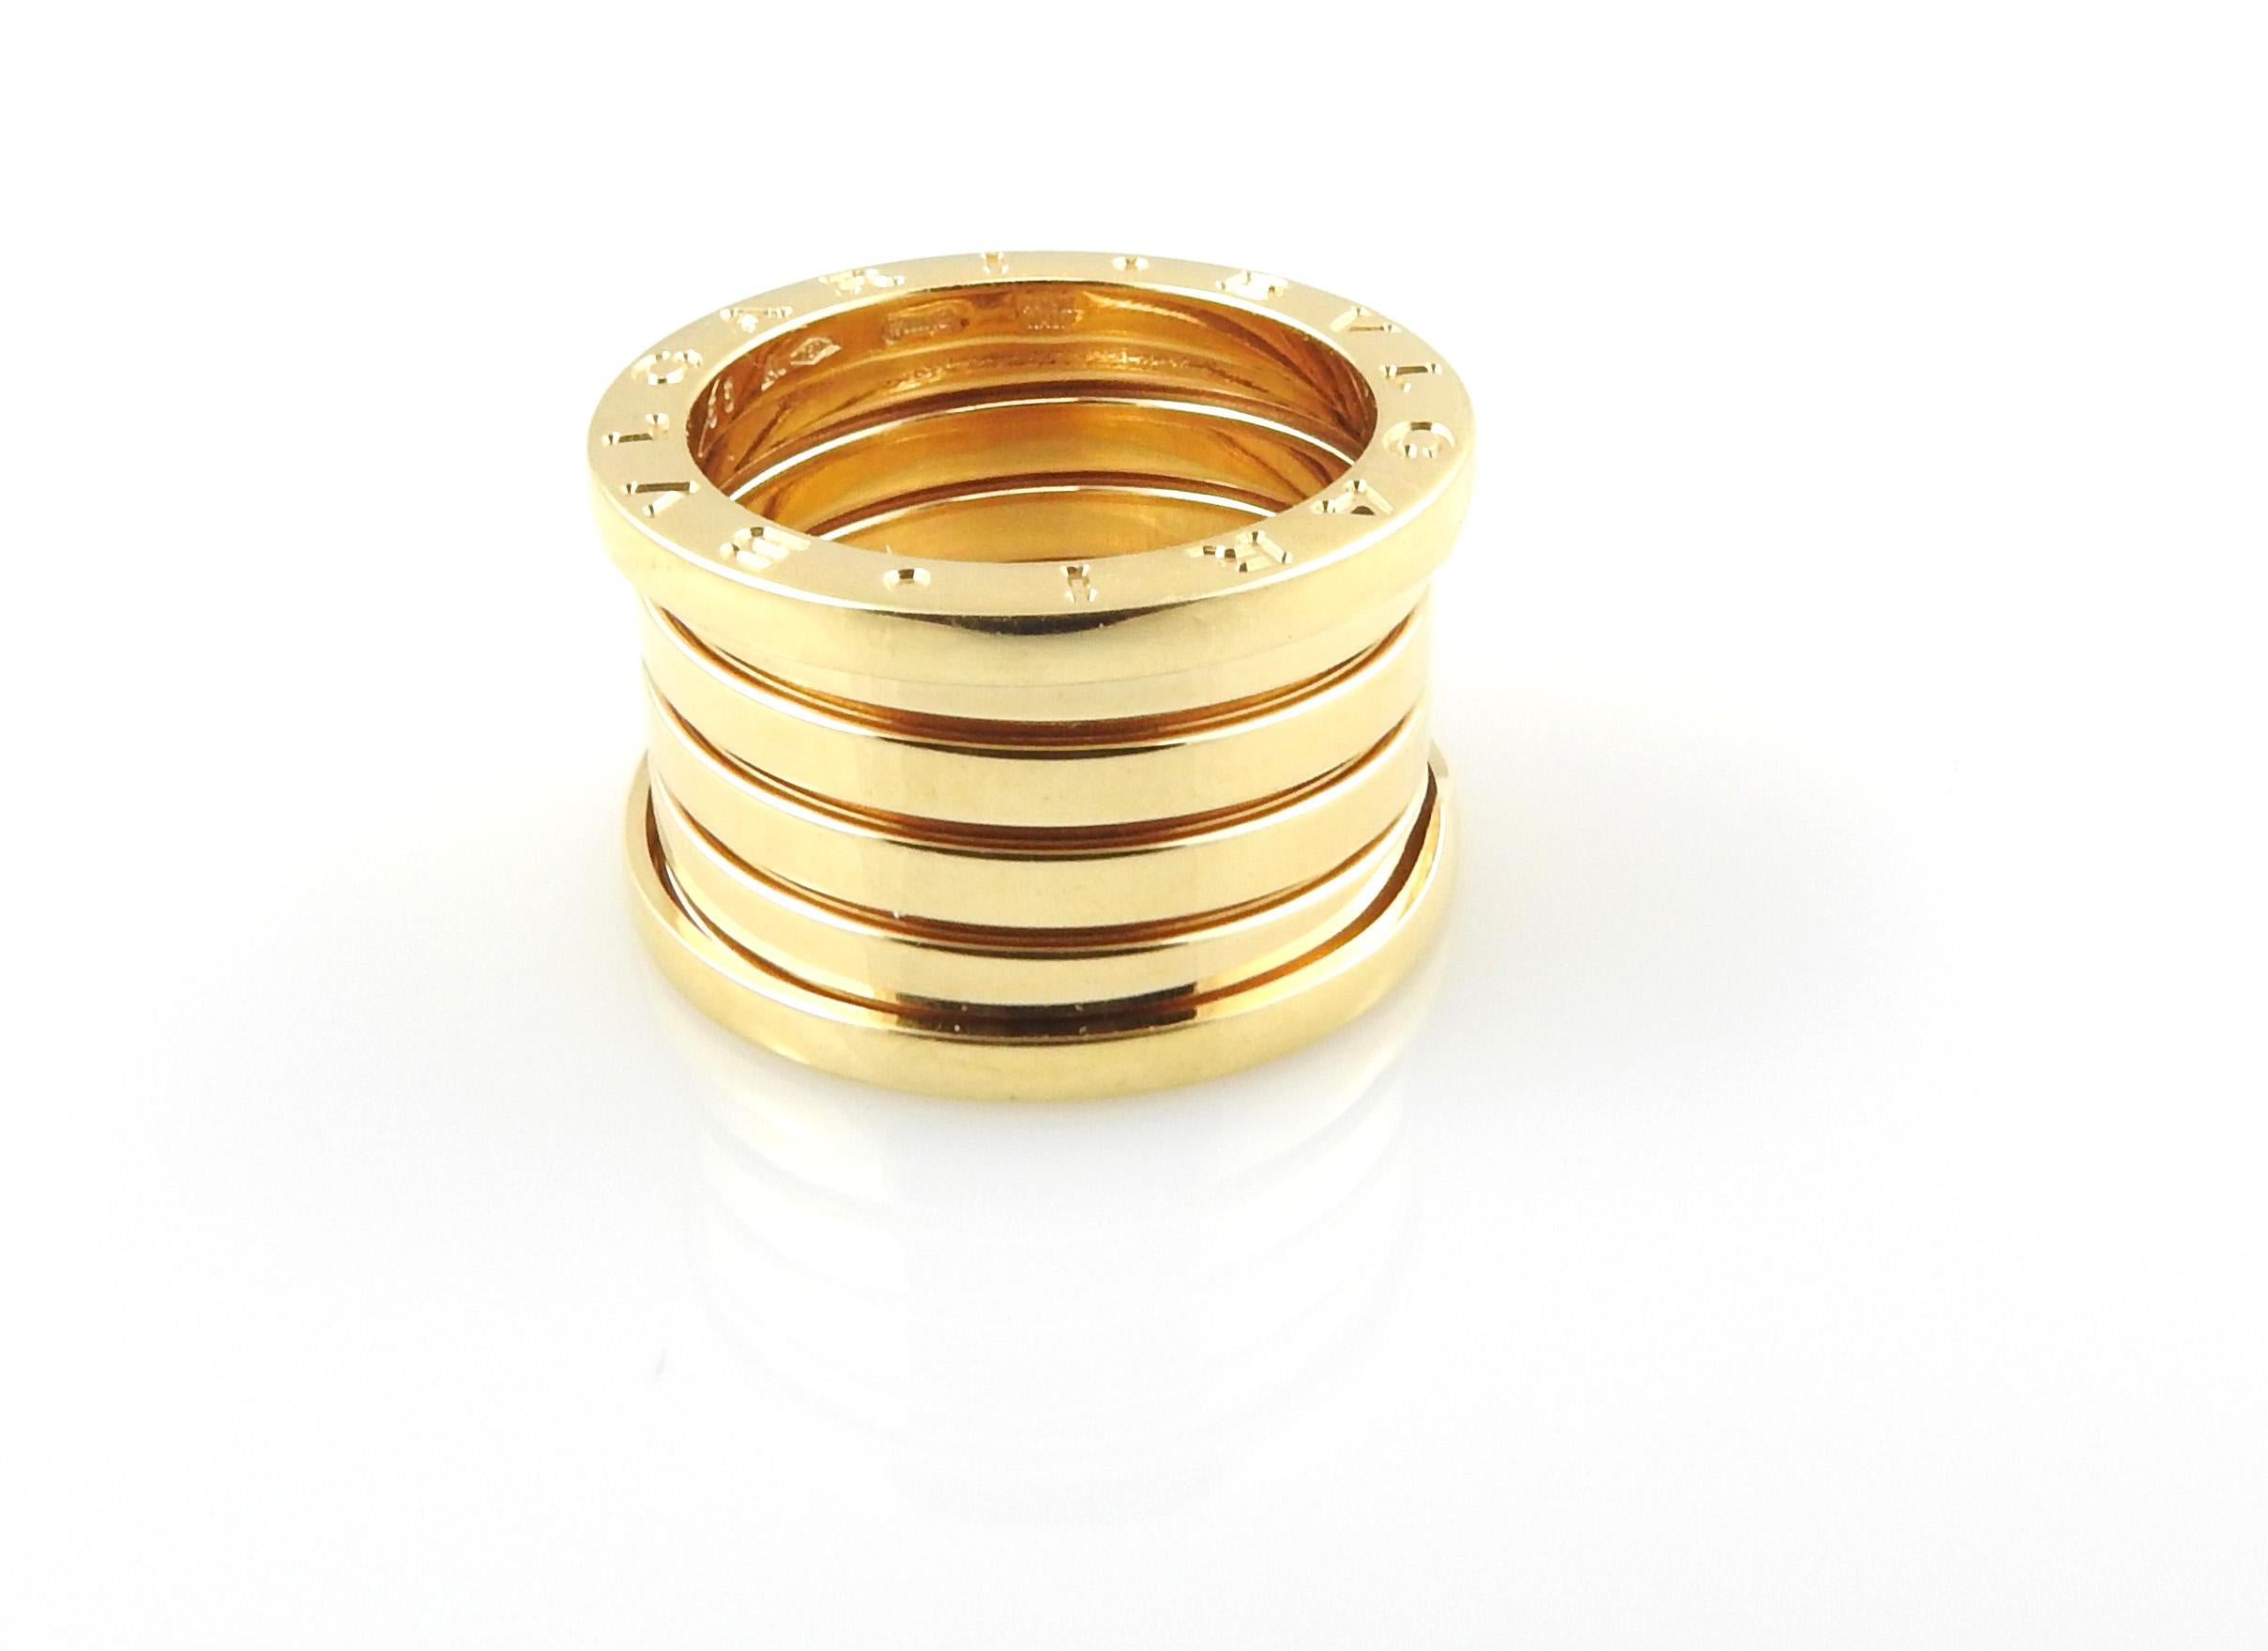 Bulgari 18K Yellow Gold B Zero 1 4 Band Ring

This beautiful and classic 4 band ring by Bvlgari is set in 18K Yellow Gold.

Size 53 - 6.5

Stamped 53 SU 750 *2337AL 750

Approx. 13mm wide

8.47 dwt/ 13.17 g

Very good preowned condition. Just